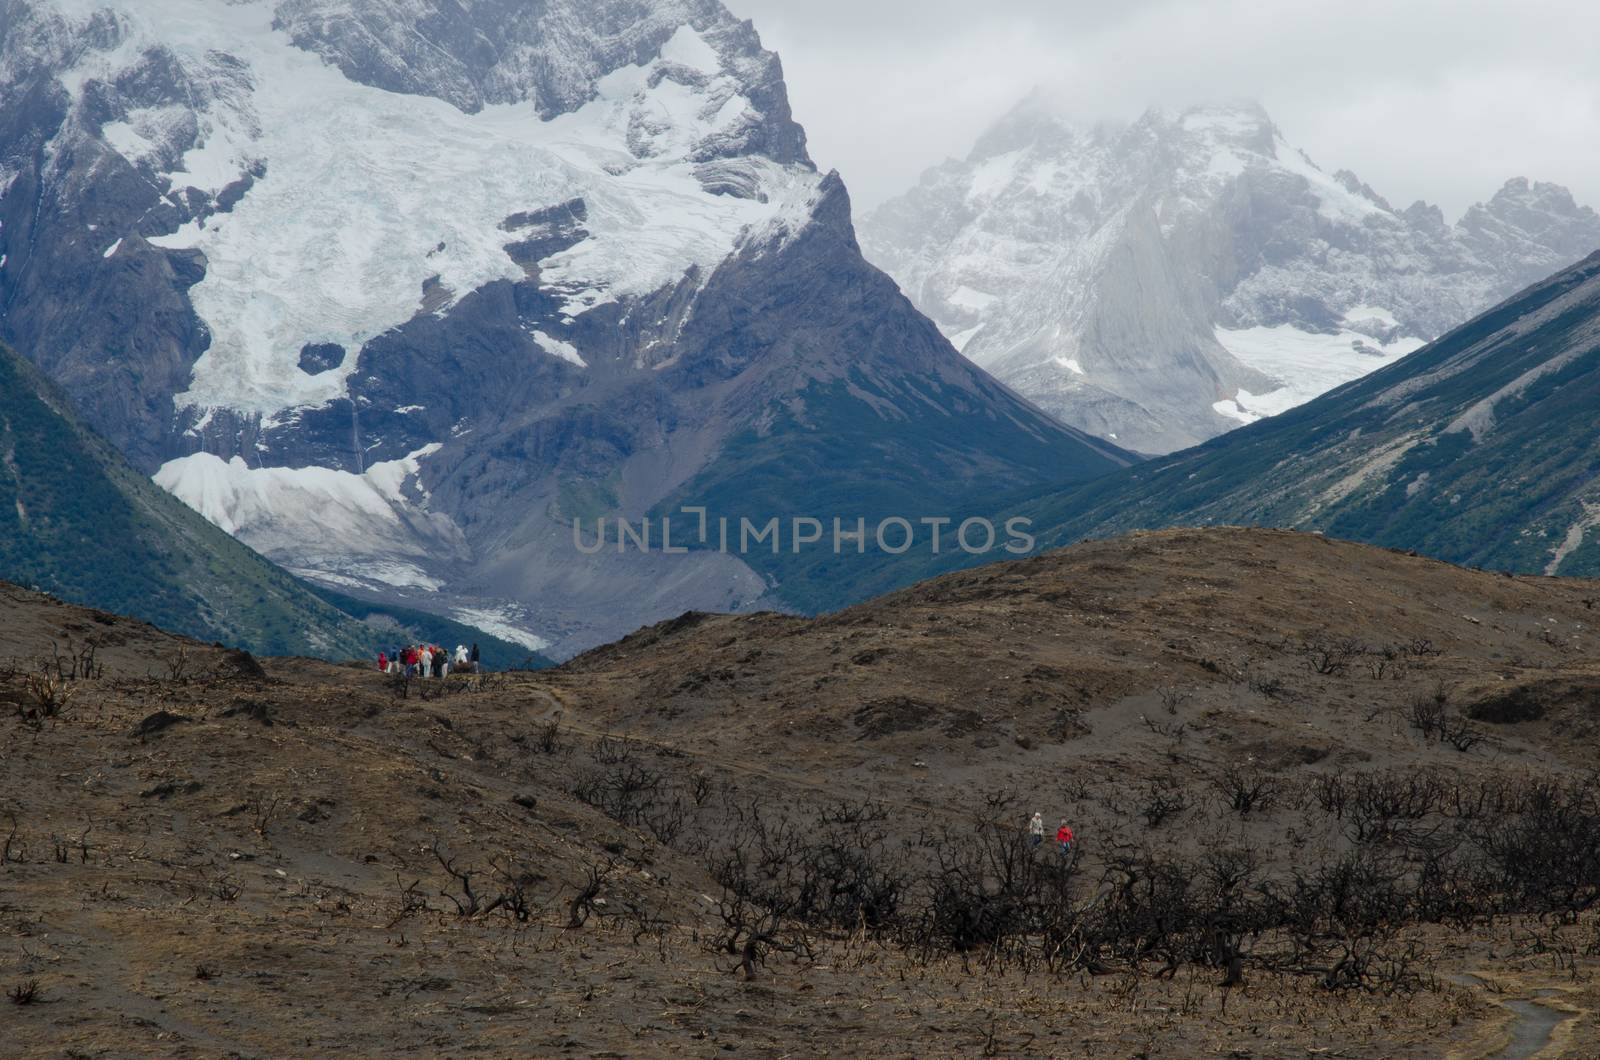 Hikers on land burned in the Torres del Paine National Park by the great fire in 2011-2012. by VictorSuarez